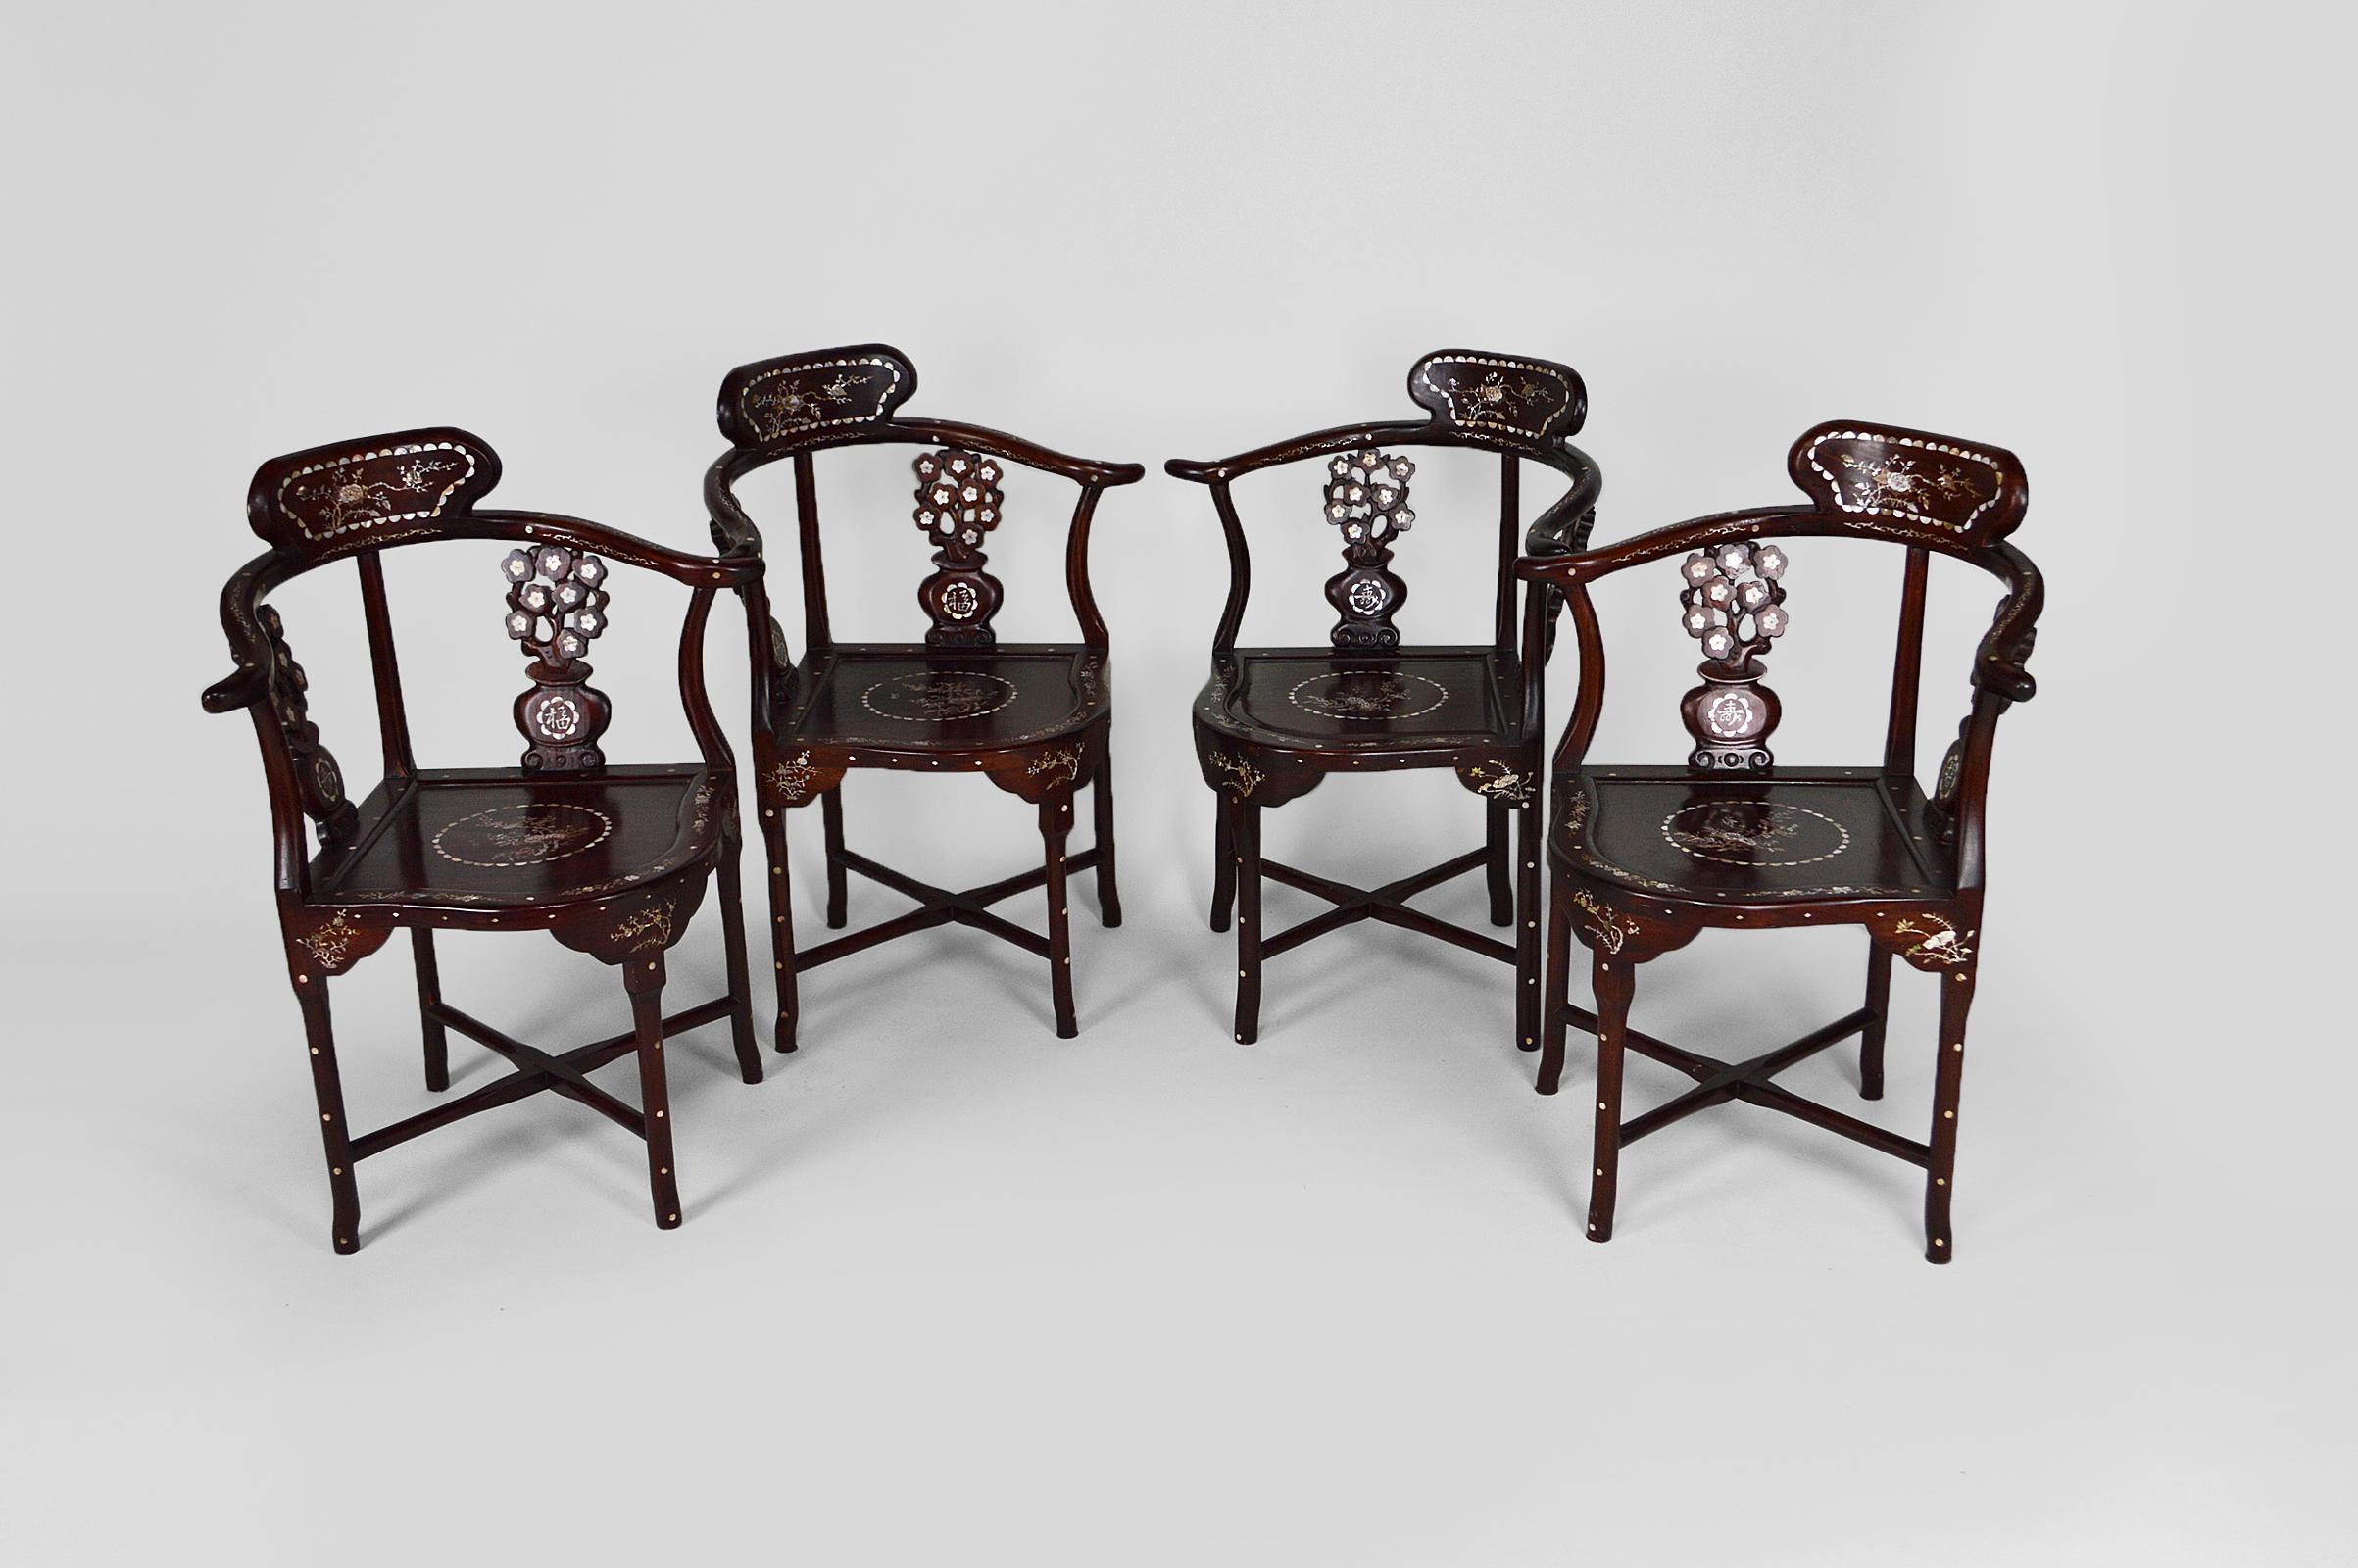 Set of 4 elegant Asian lounge armchairs.
In carved wood inlays with many animal and vegetal scenes: birds, flowers, plants...

Chinoiserie / Chinese Export, Indochina or southern China, 20th century (between 1900-1920). 

In excellent